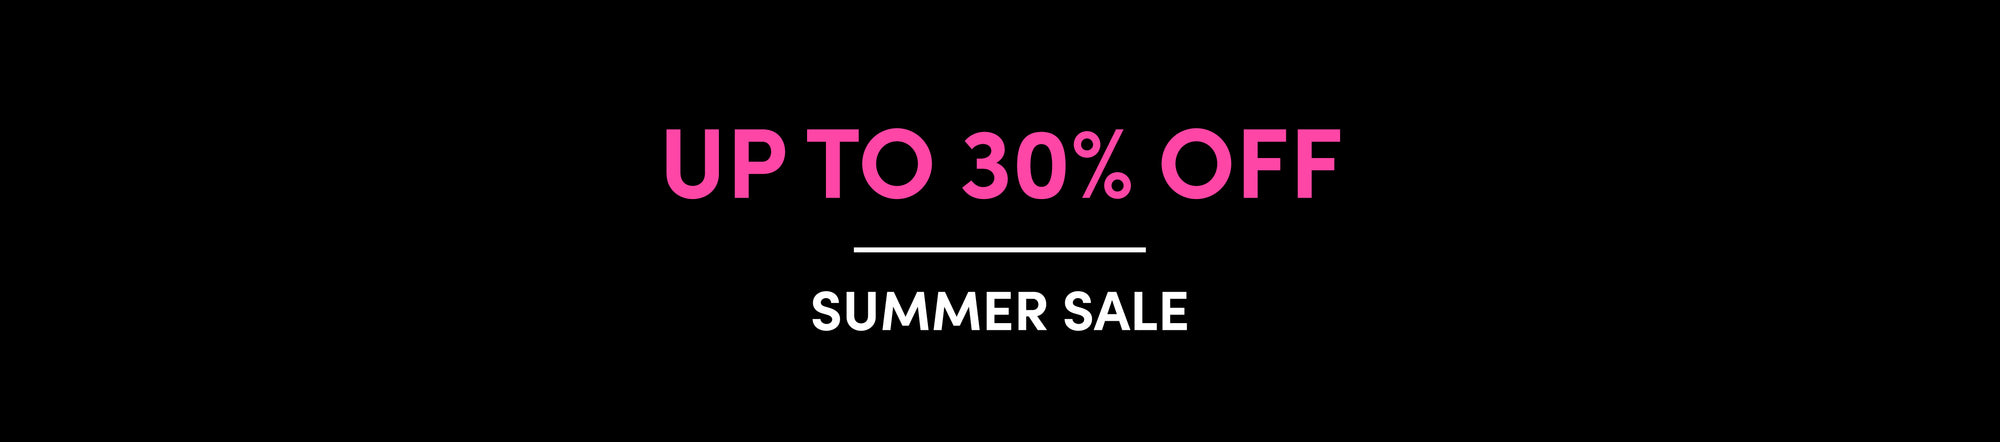 Up to 30% off Summer Sale